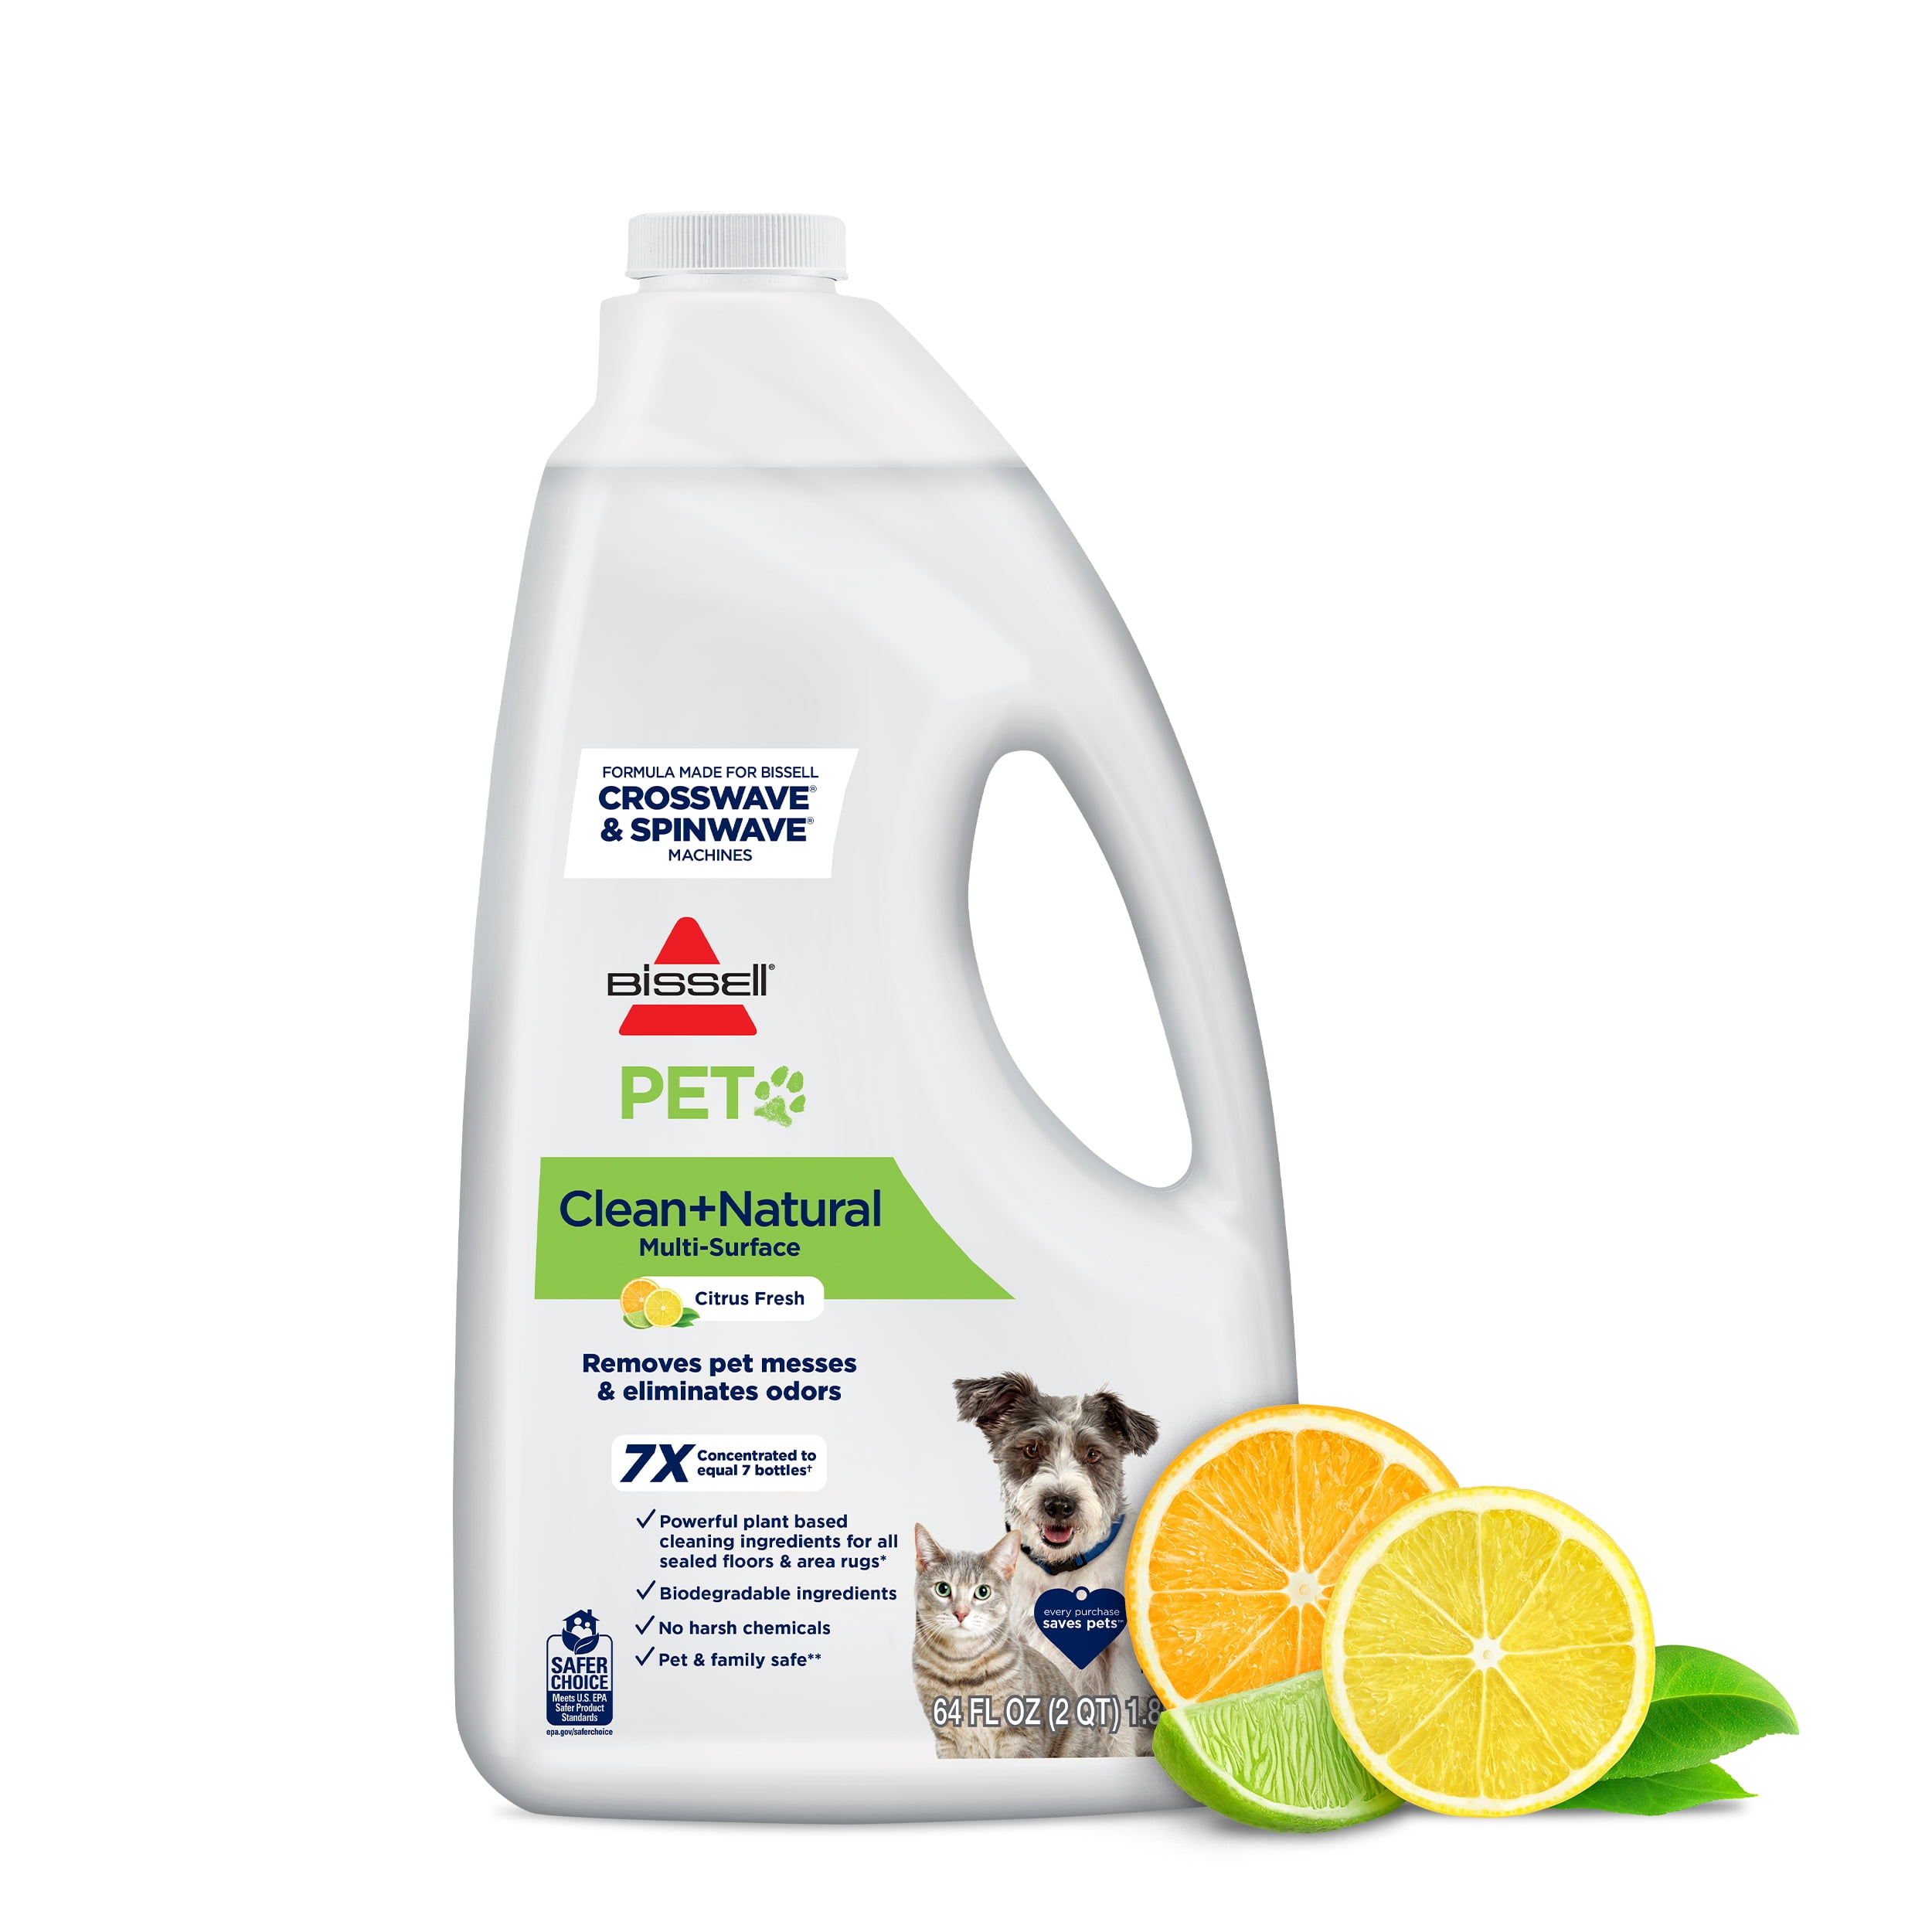 Bissell Pet. BUISSELL natural Multi surface Floor Cleaning solution. Clean Pet. Star Brite Multi-surface Pet Odor.